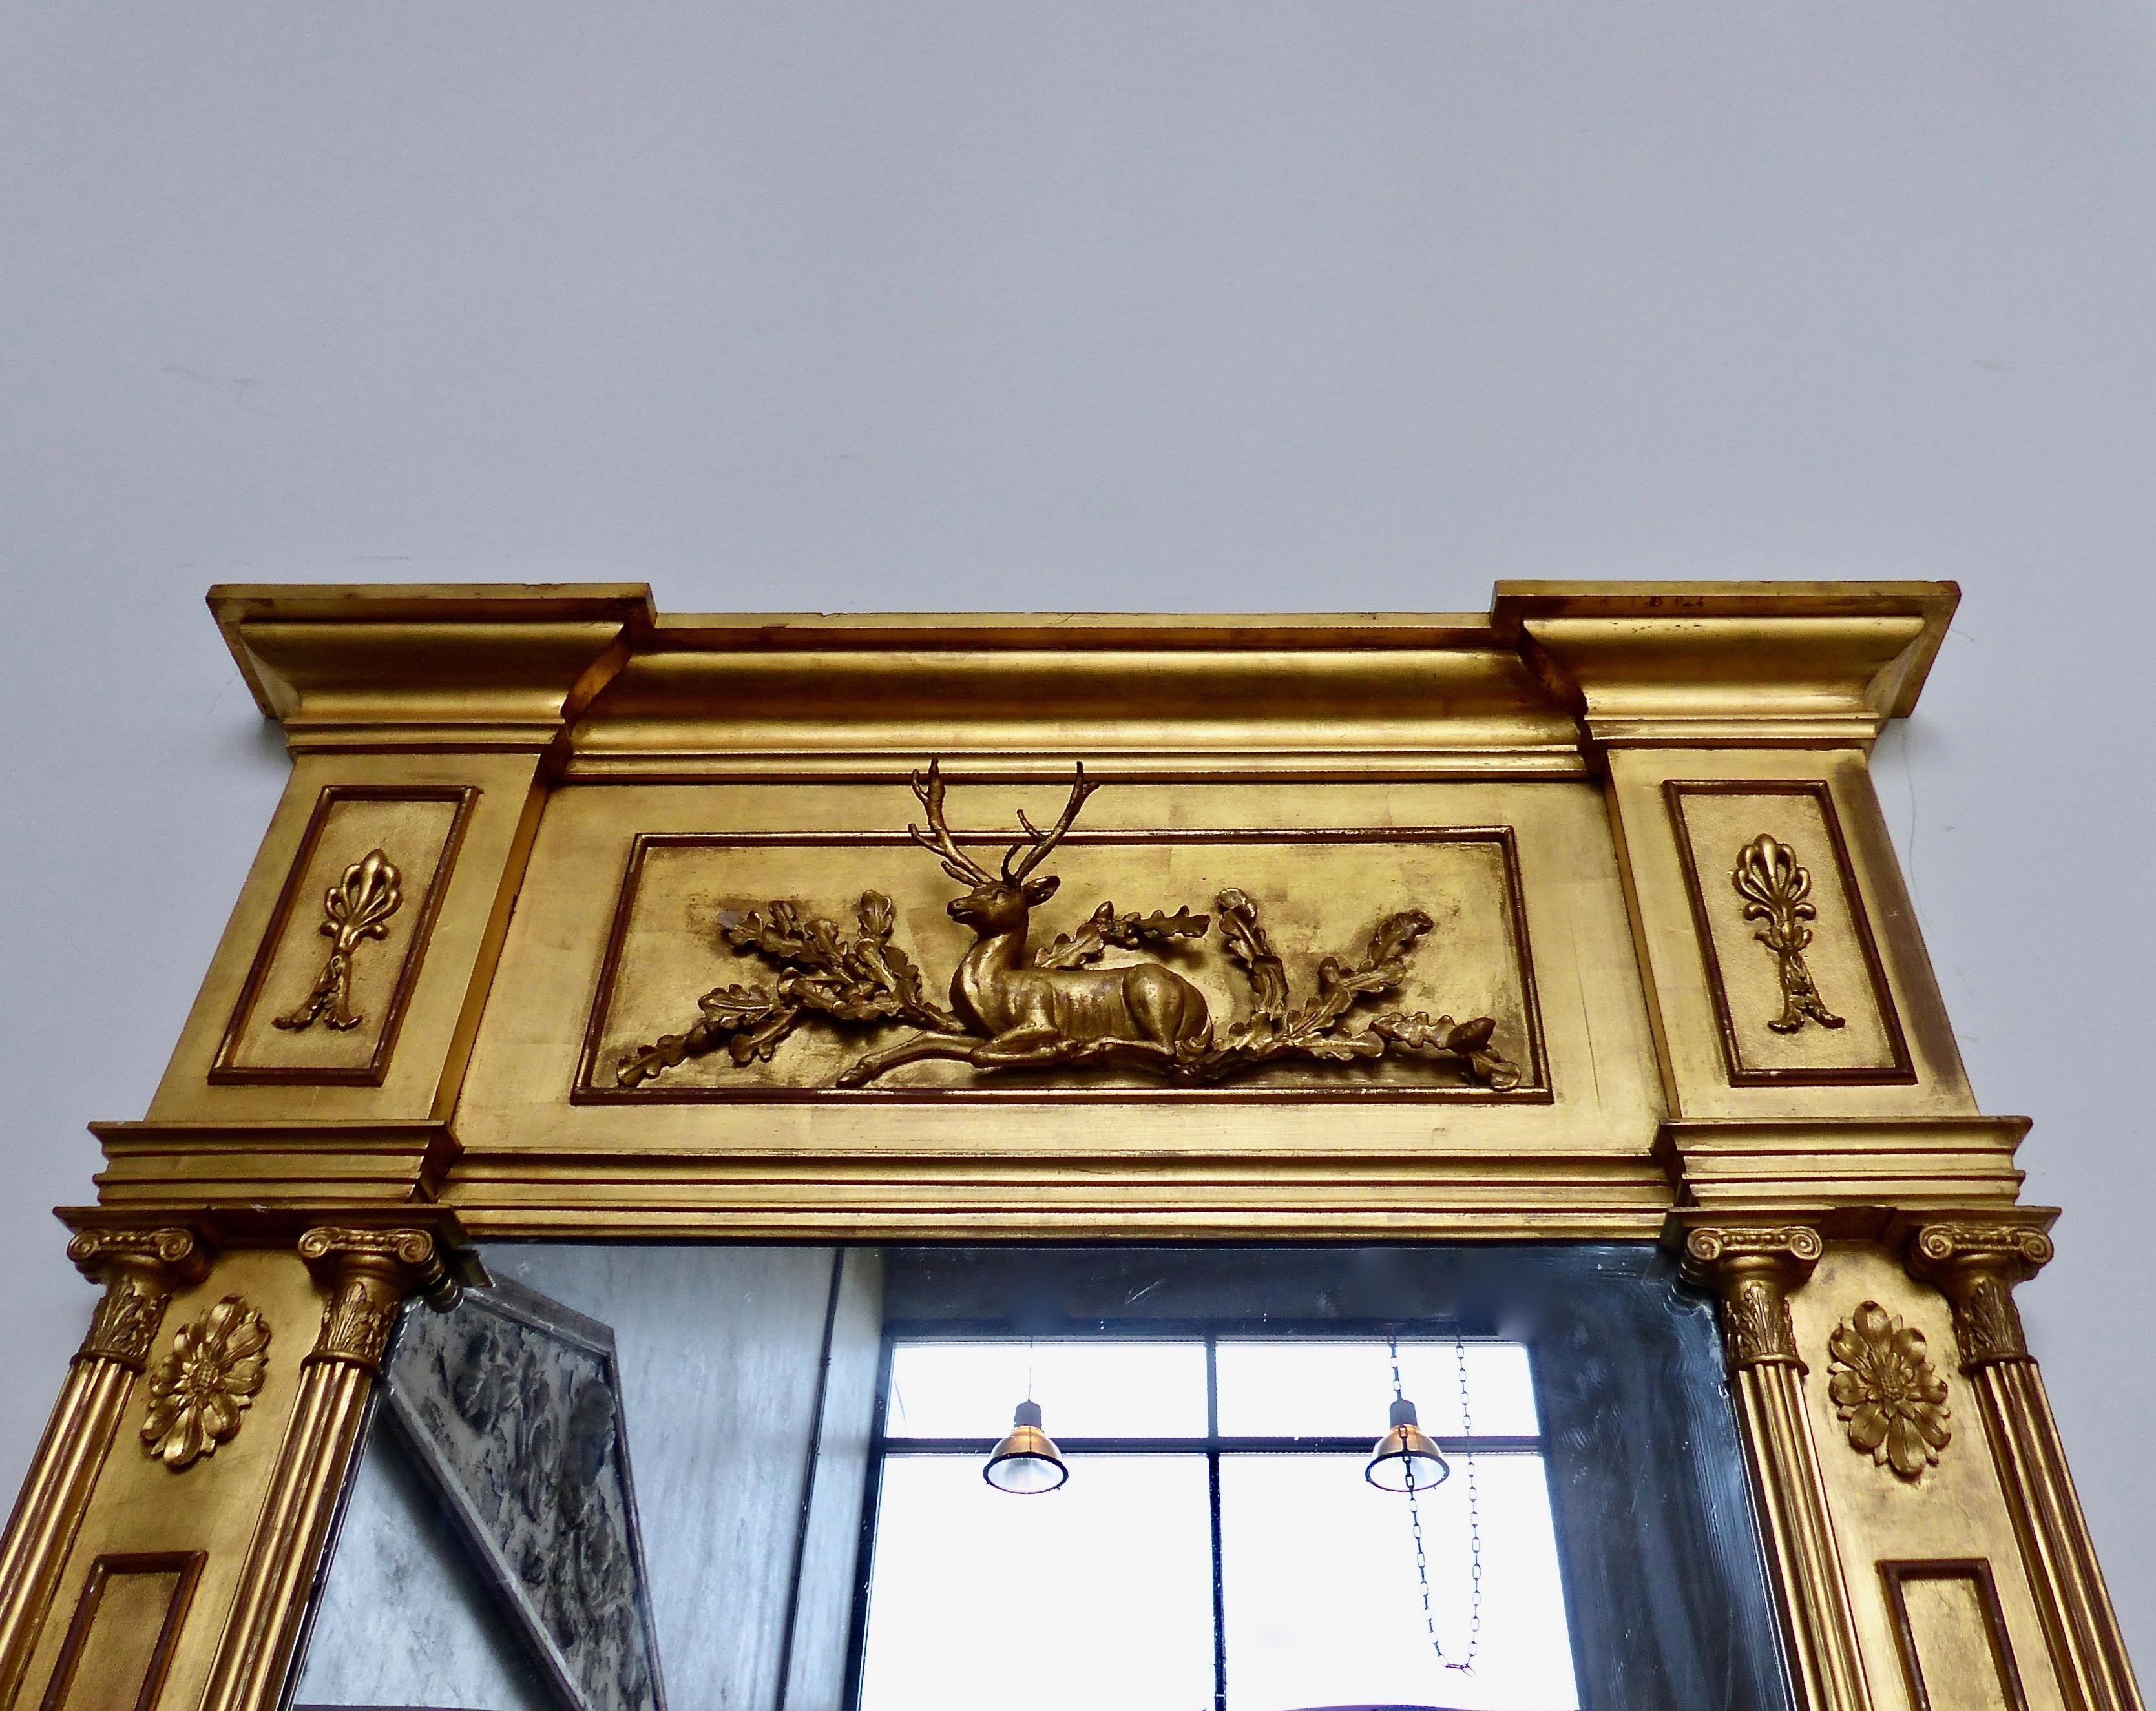 A stately English mantel mirror featuring a hand carved deer as its centerpiece. Original gold leaf over wood from circa 1850. Classic column and pediment details. An excellent example of the best workmanship of its era.
Dimensions: 76 H” x 44 W” x